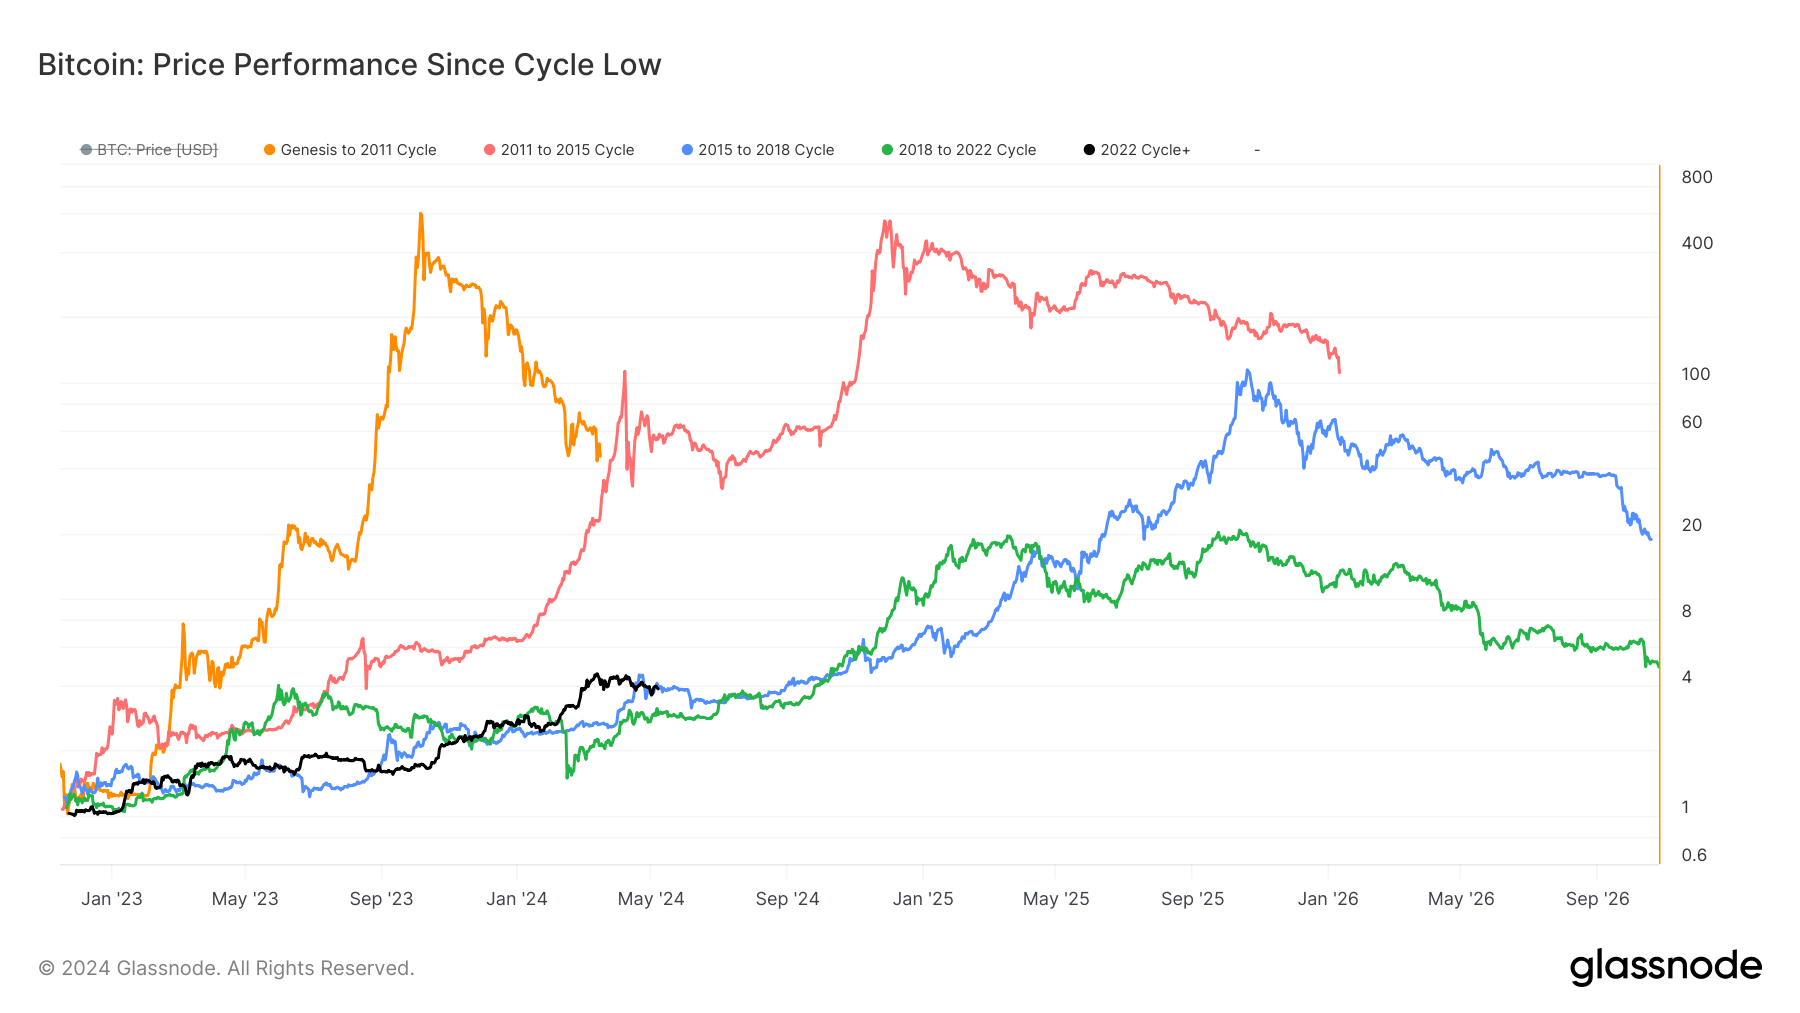 Bitcoin price performance since the bottom of the cycle: (Source: Glassnode)